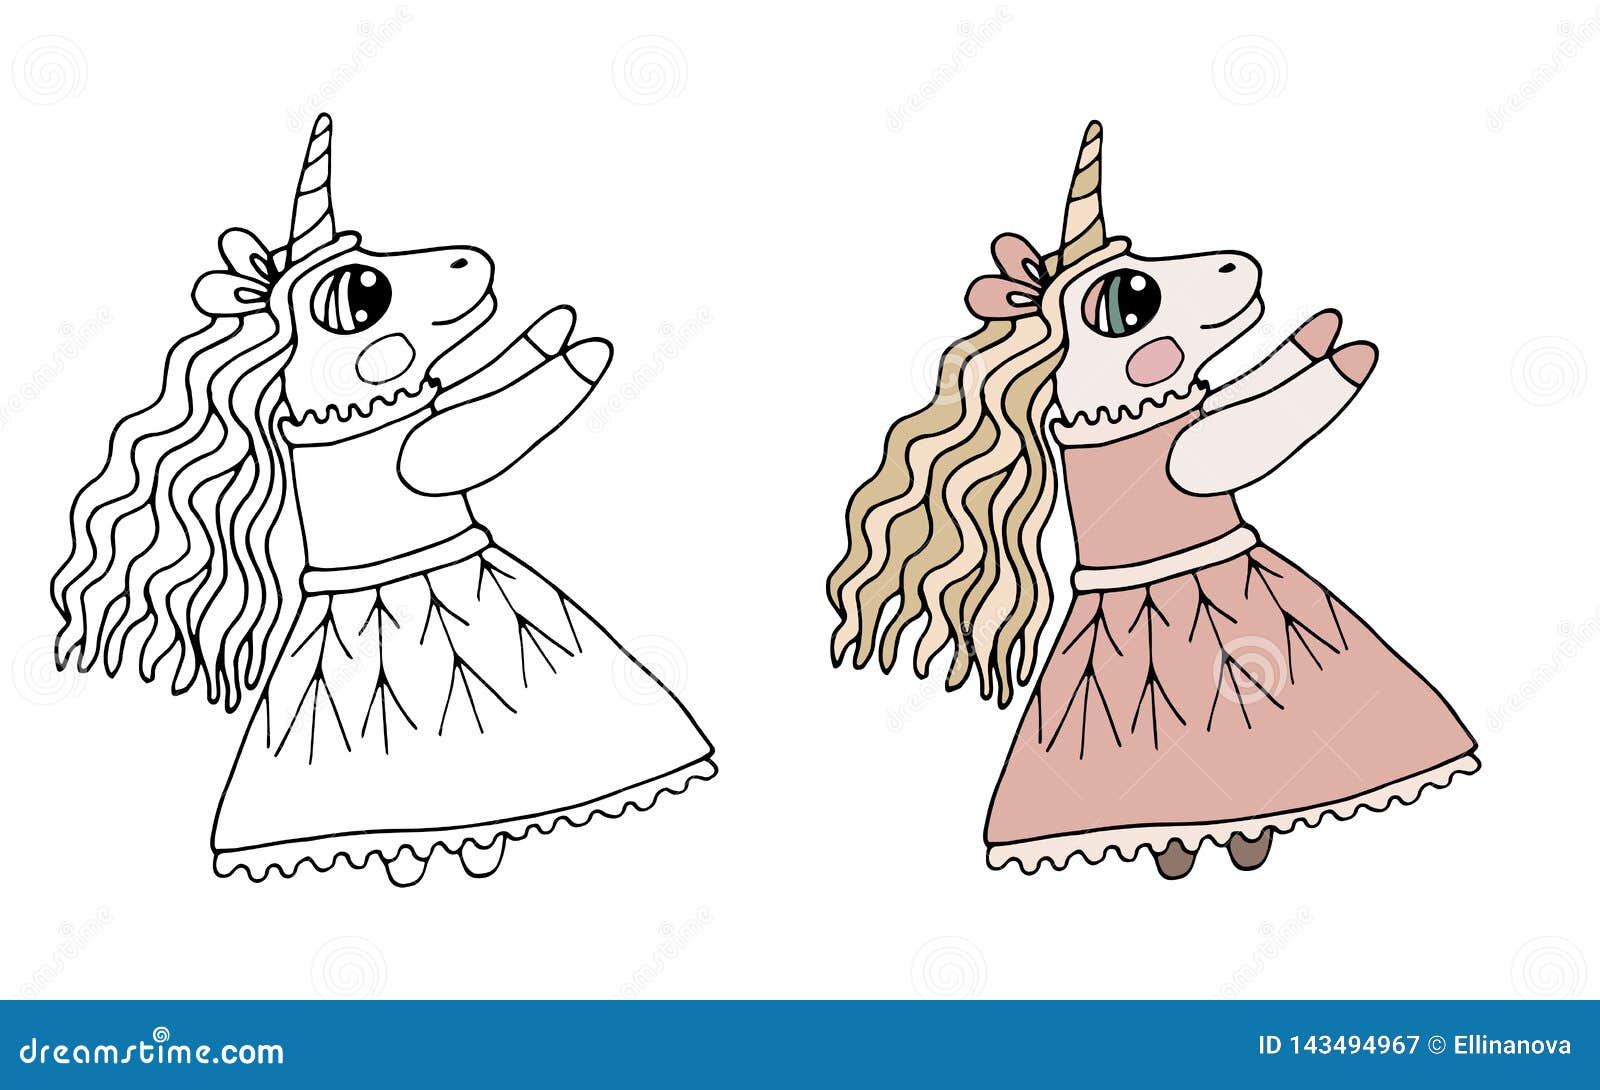 Black Line Child Unicorn with Long Hair in Dress for Coloring Book ...